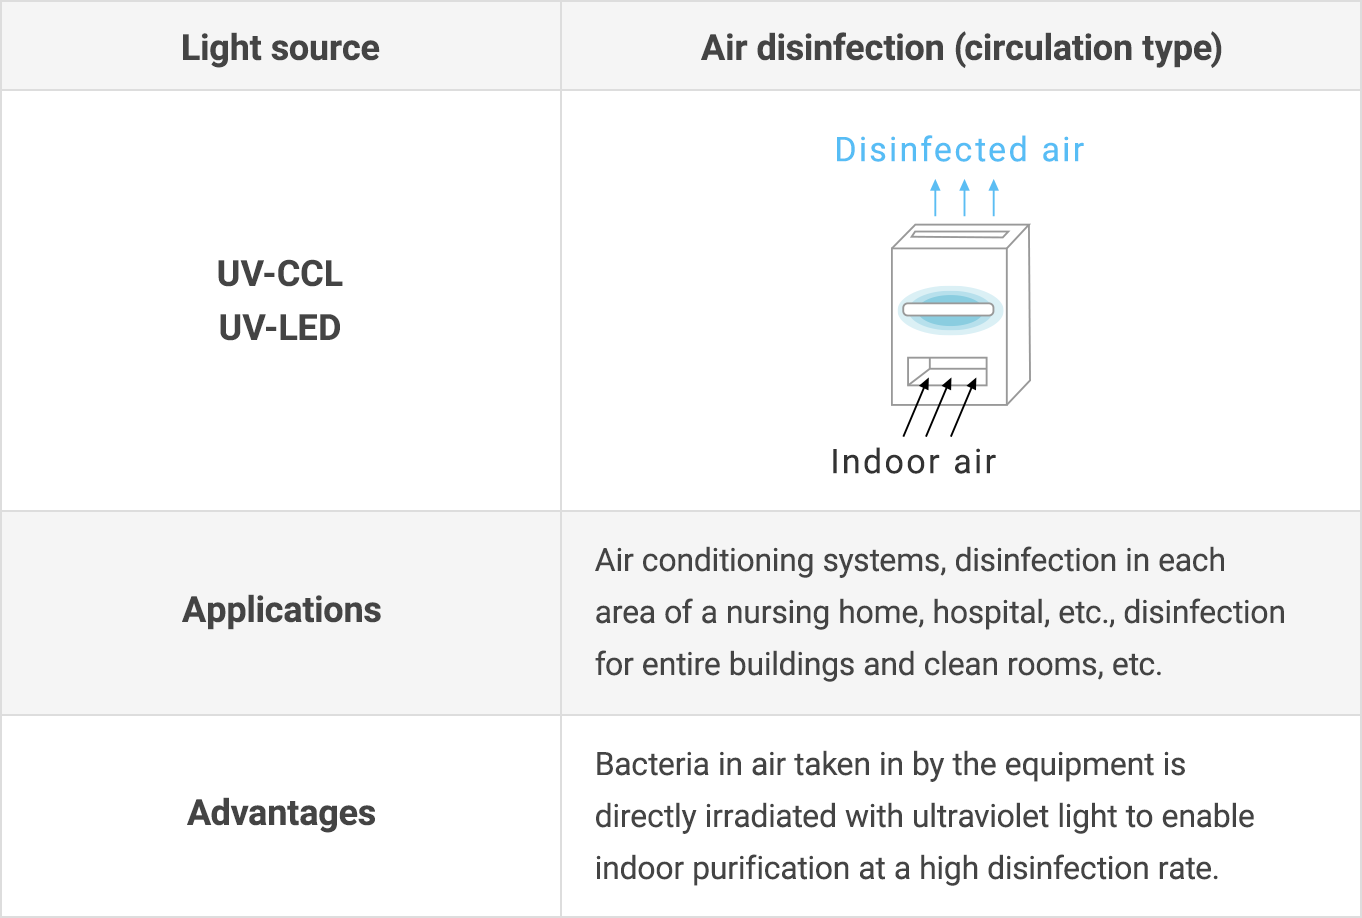 Basic structure of air disinfection